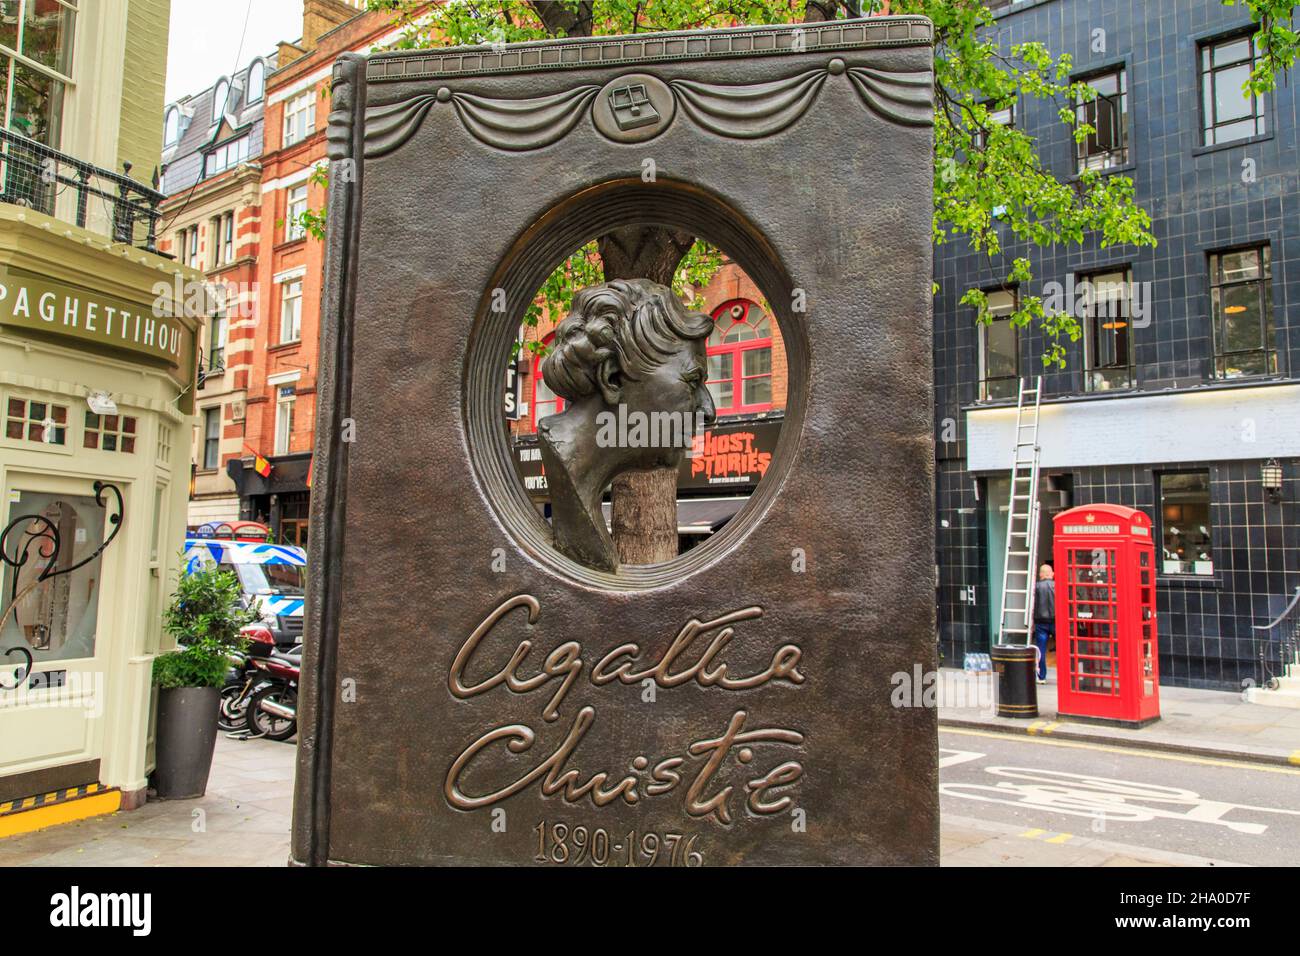 LONDON, GREAT BRITAIN - MAY 22, 2014: It is a monument to the writer Agatha Christie in the heart of Covent Garden. Stock Photo